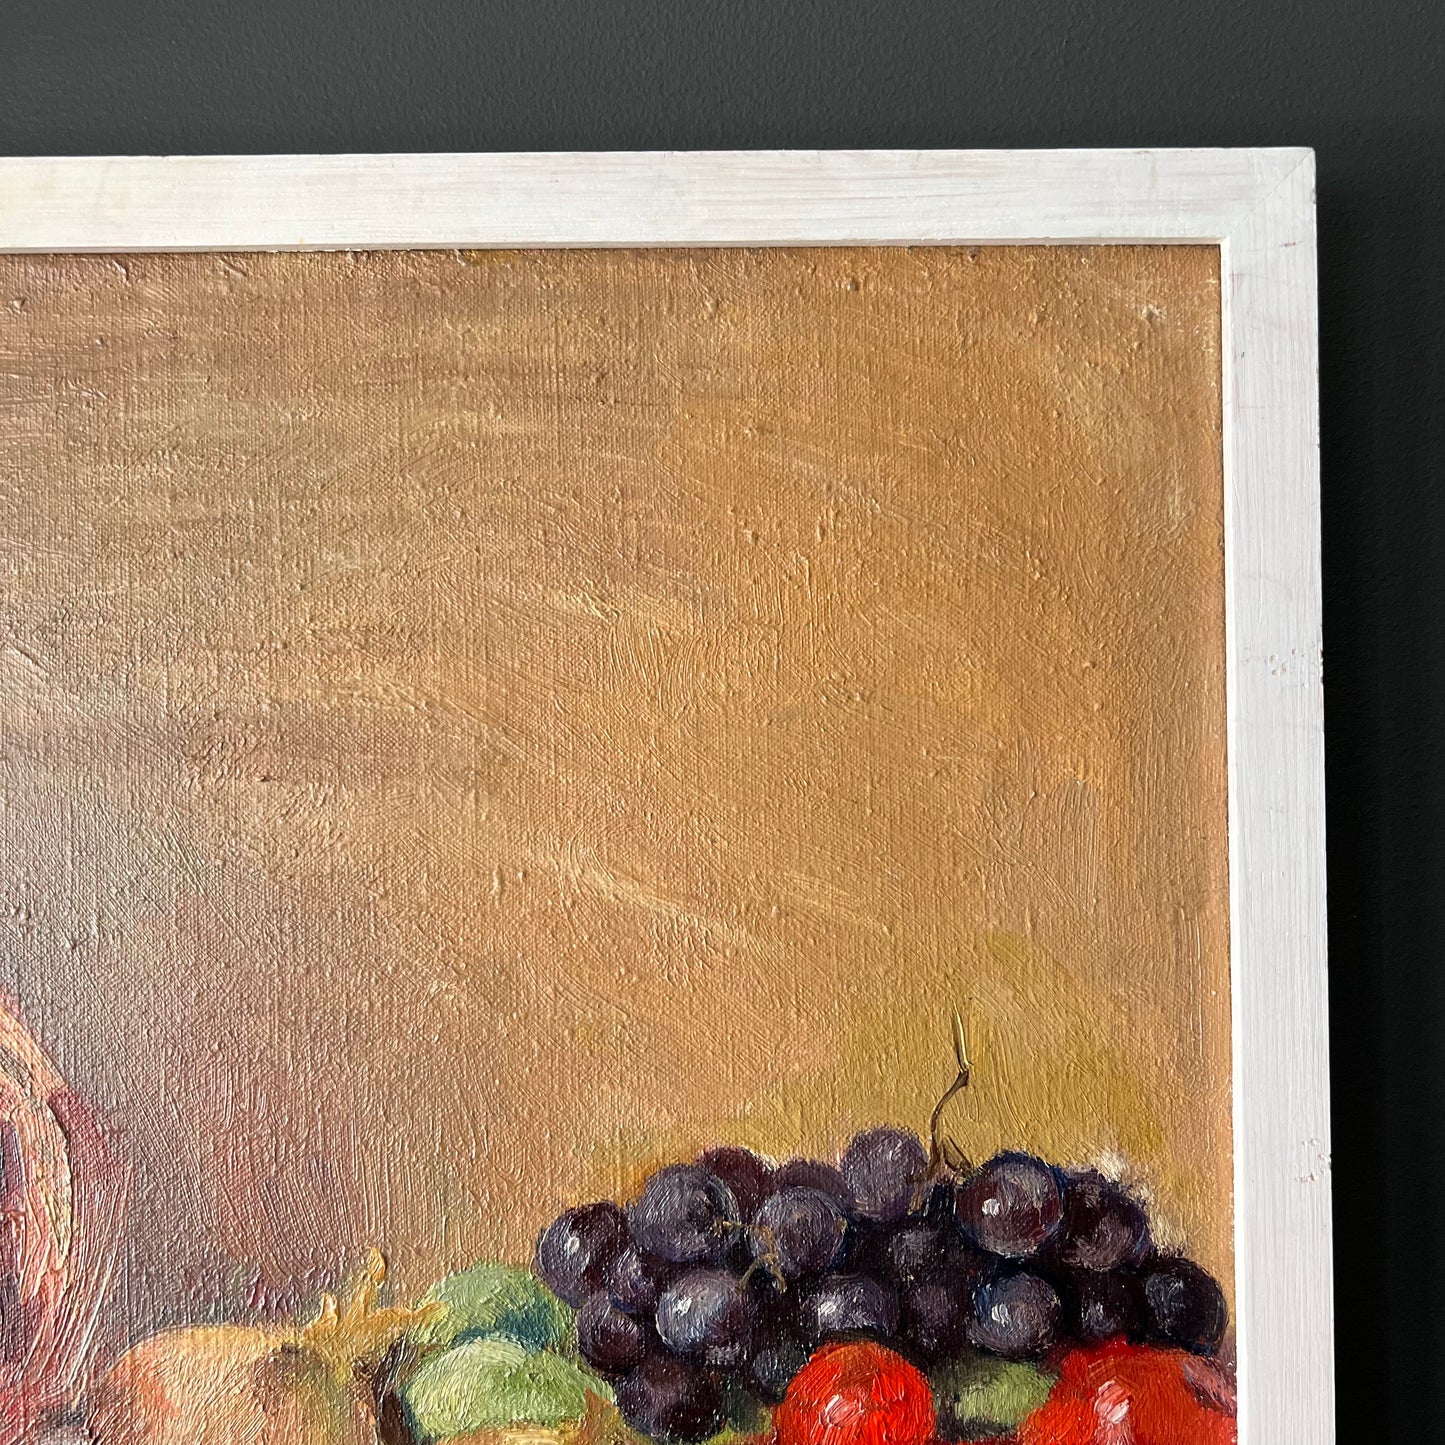 Vintage Oil Painting Still Life Tomatoes, Onions & Grapes